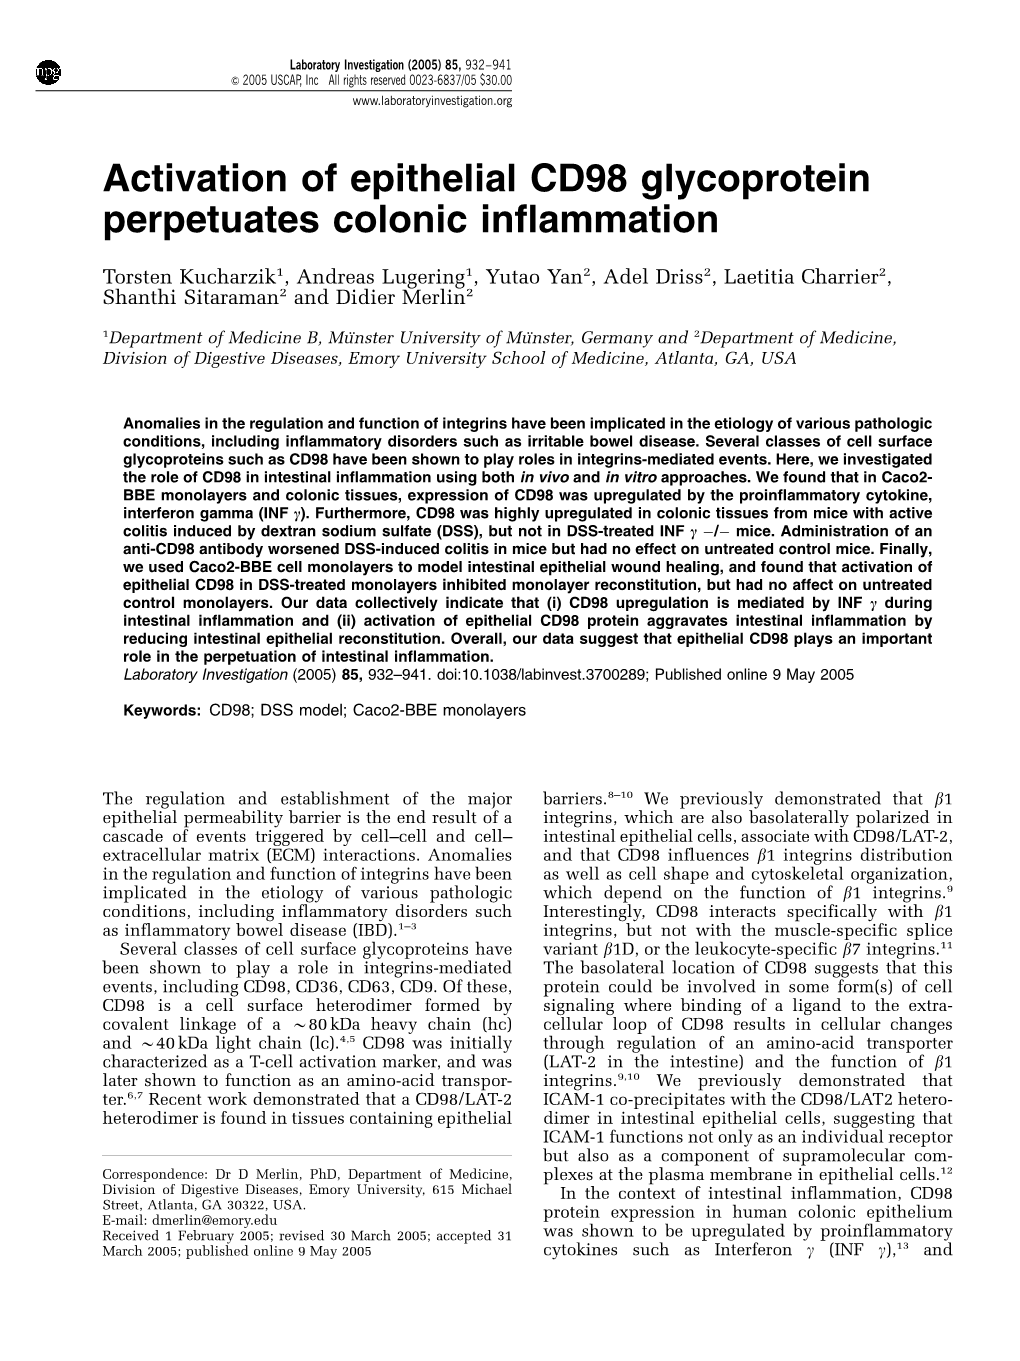 Activation of Epithelial CD98 Glycoprotein Perpetuates Colonic Inflammation